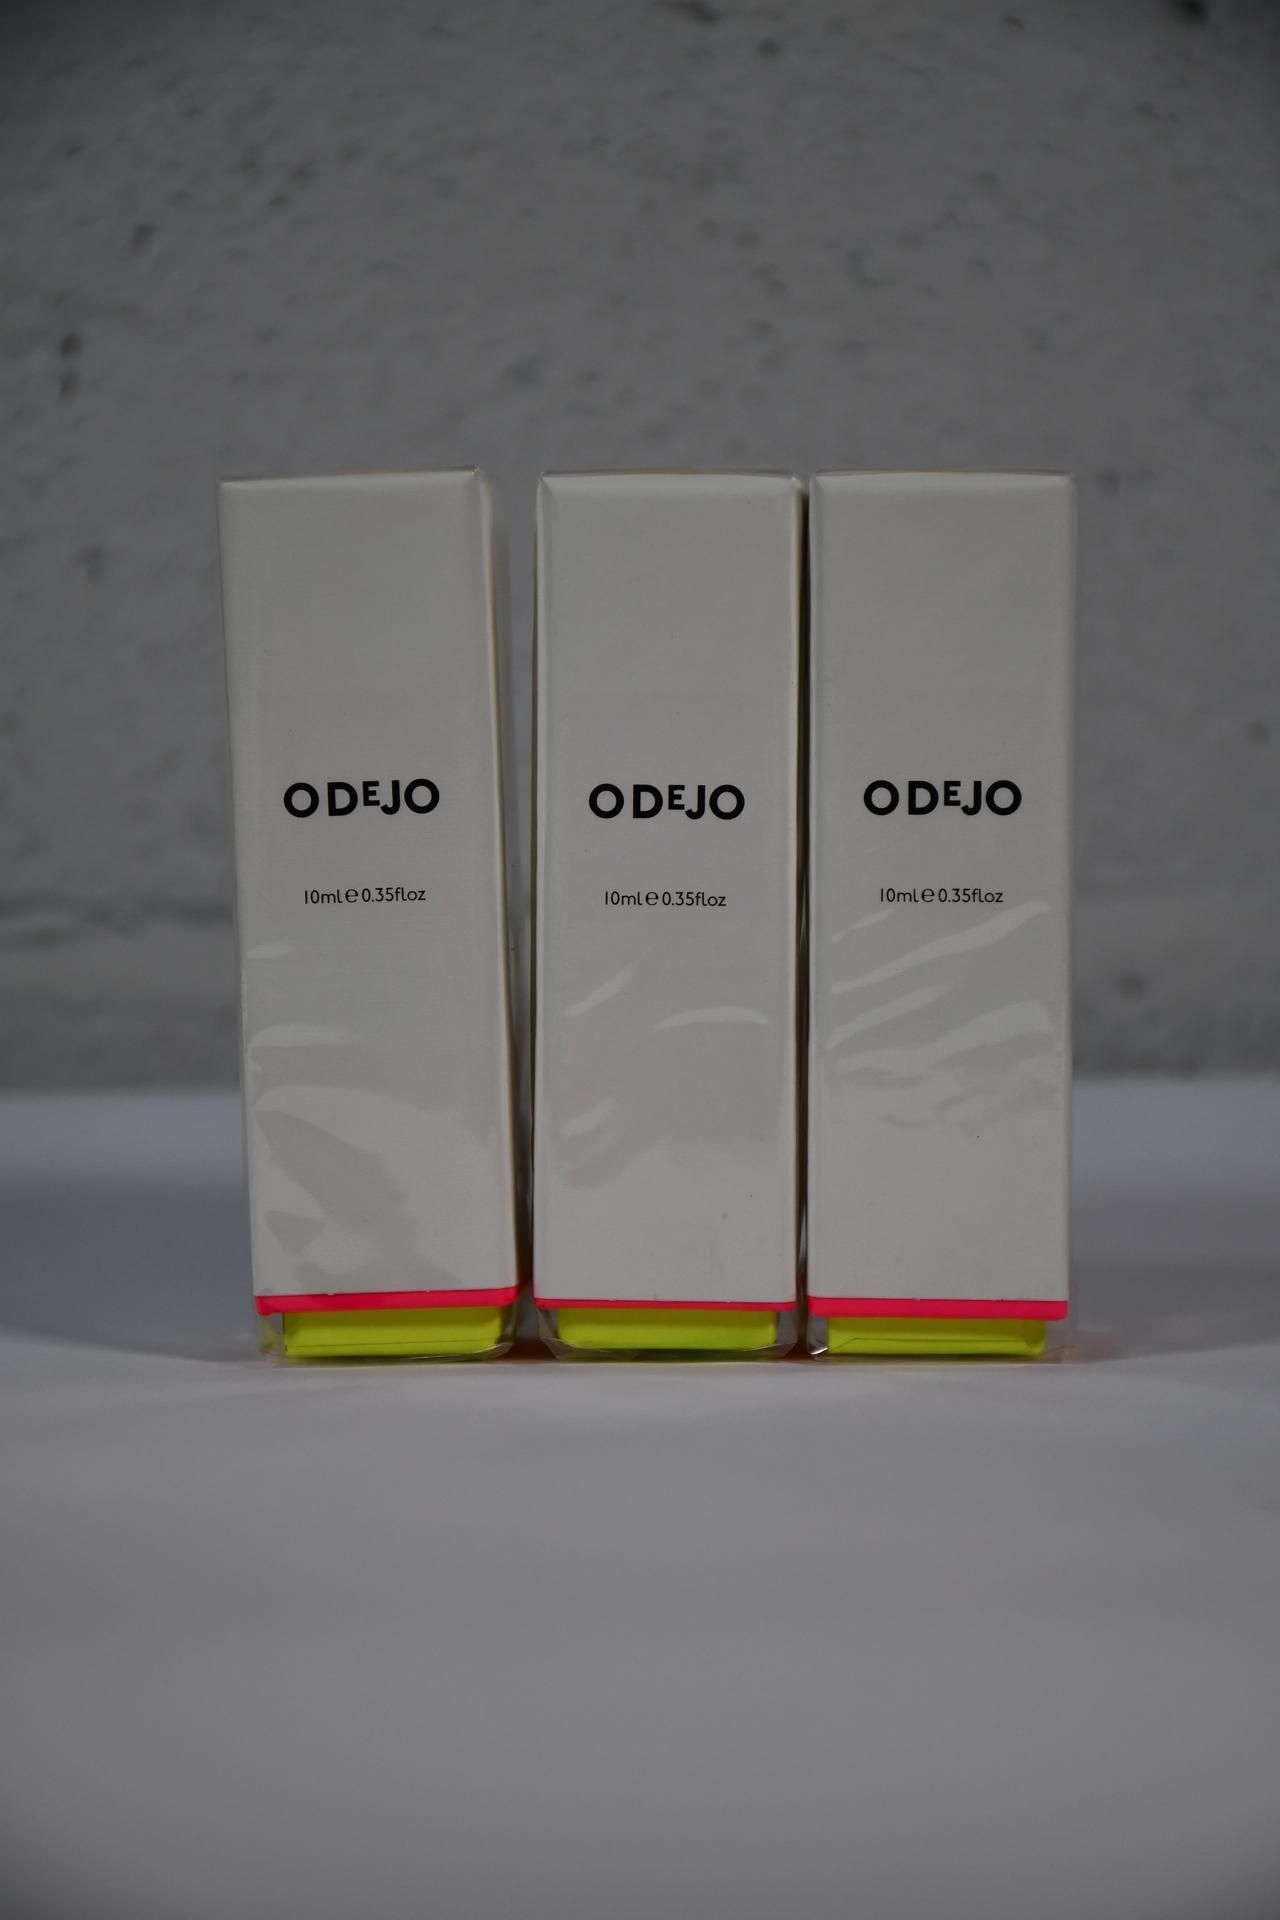 One Hundred and Twenty Odejo Rollerball Perfumes (10ml).